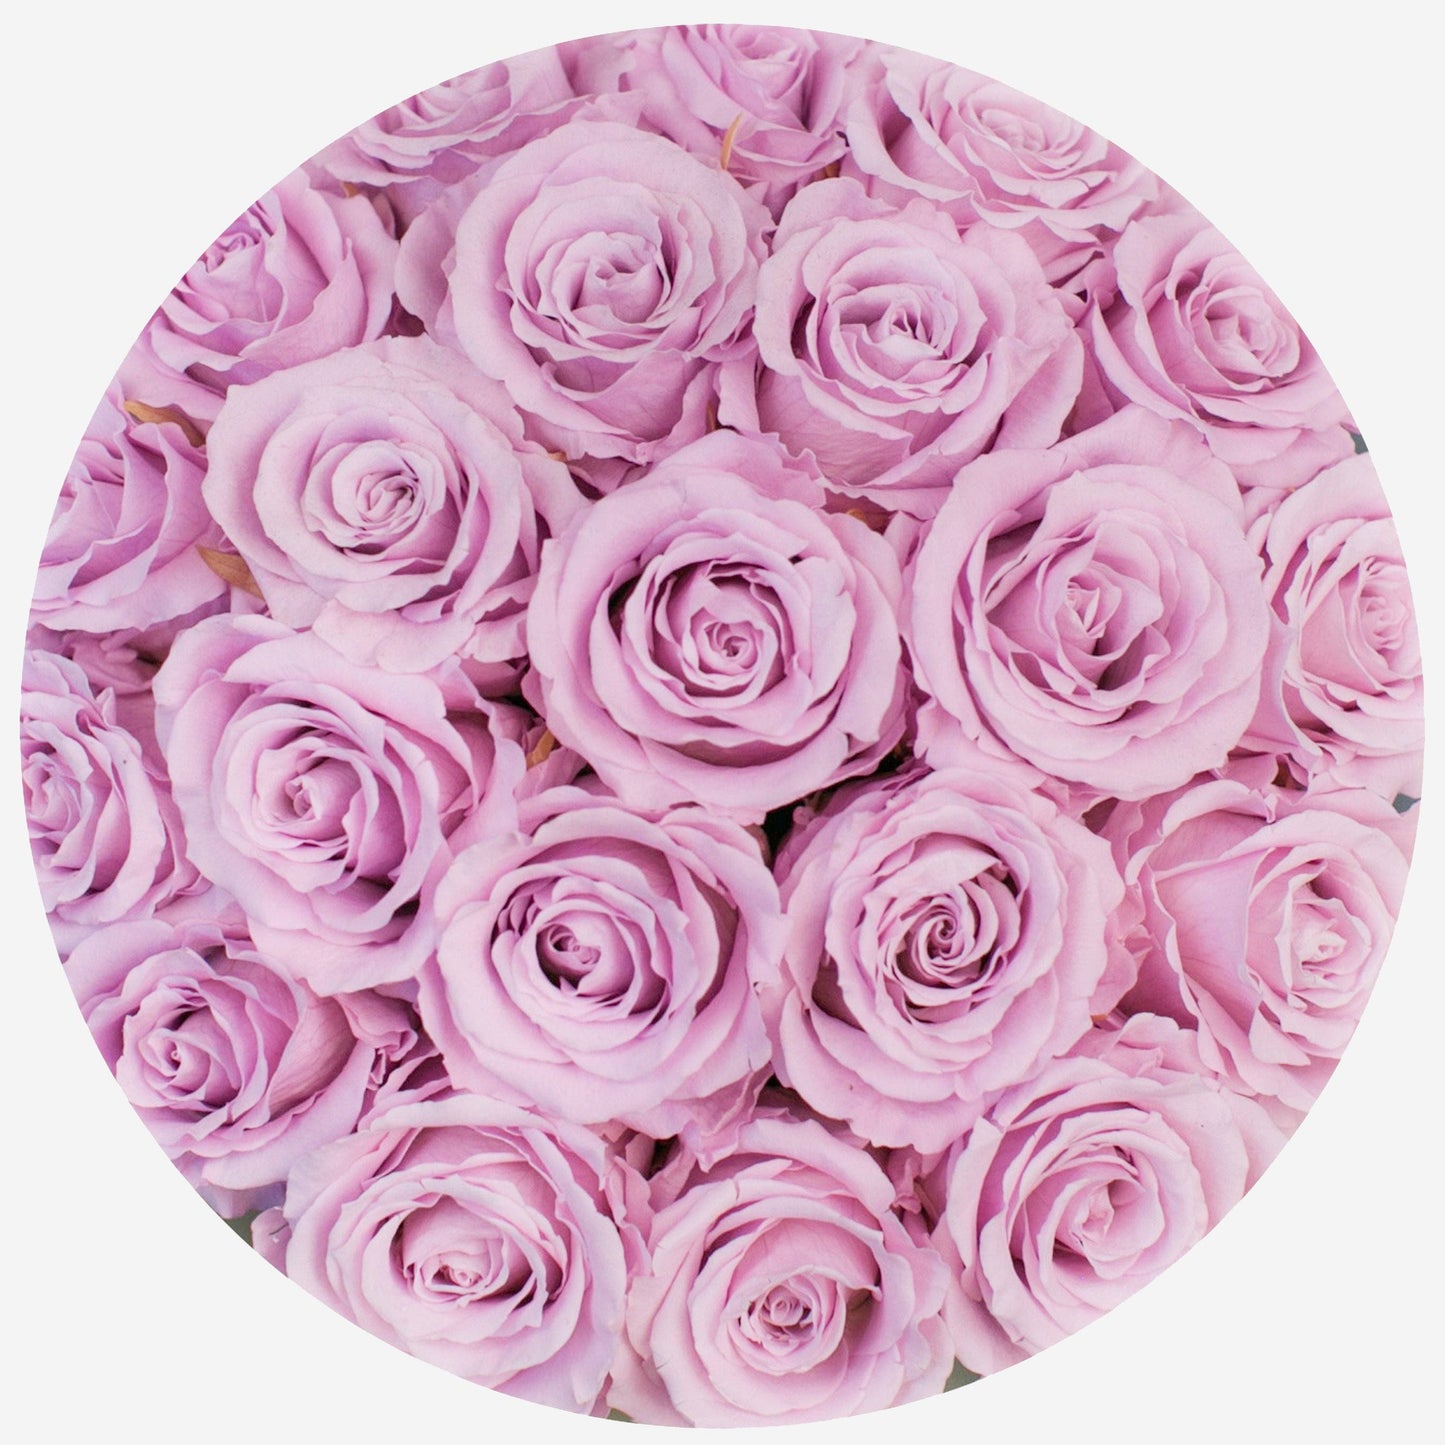 Classic Hot Pink Suede Dome Box | Light Pink Roses - The Million Roses